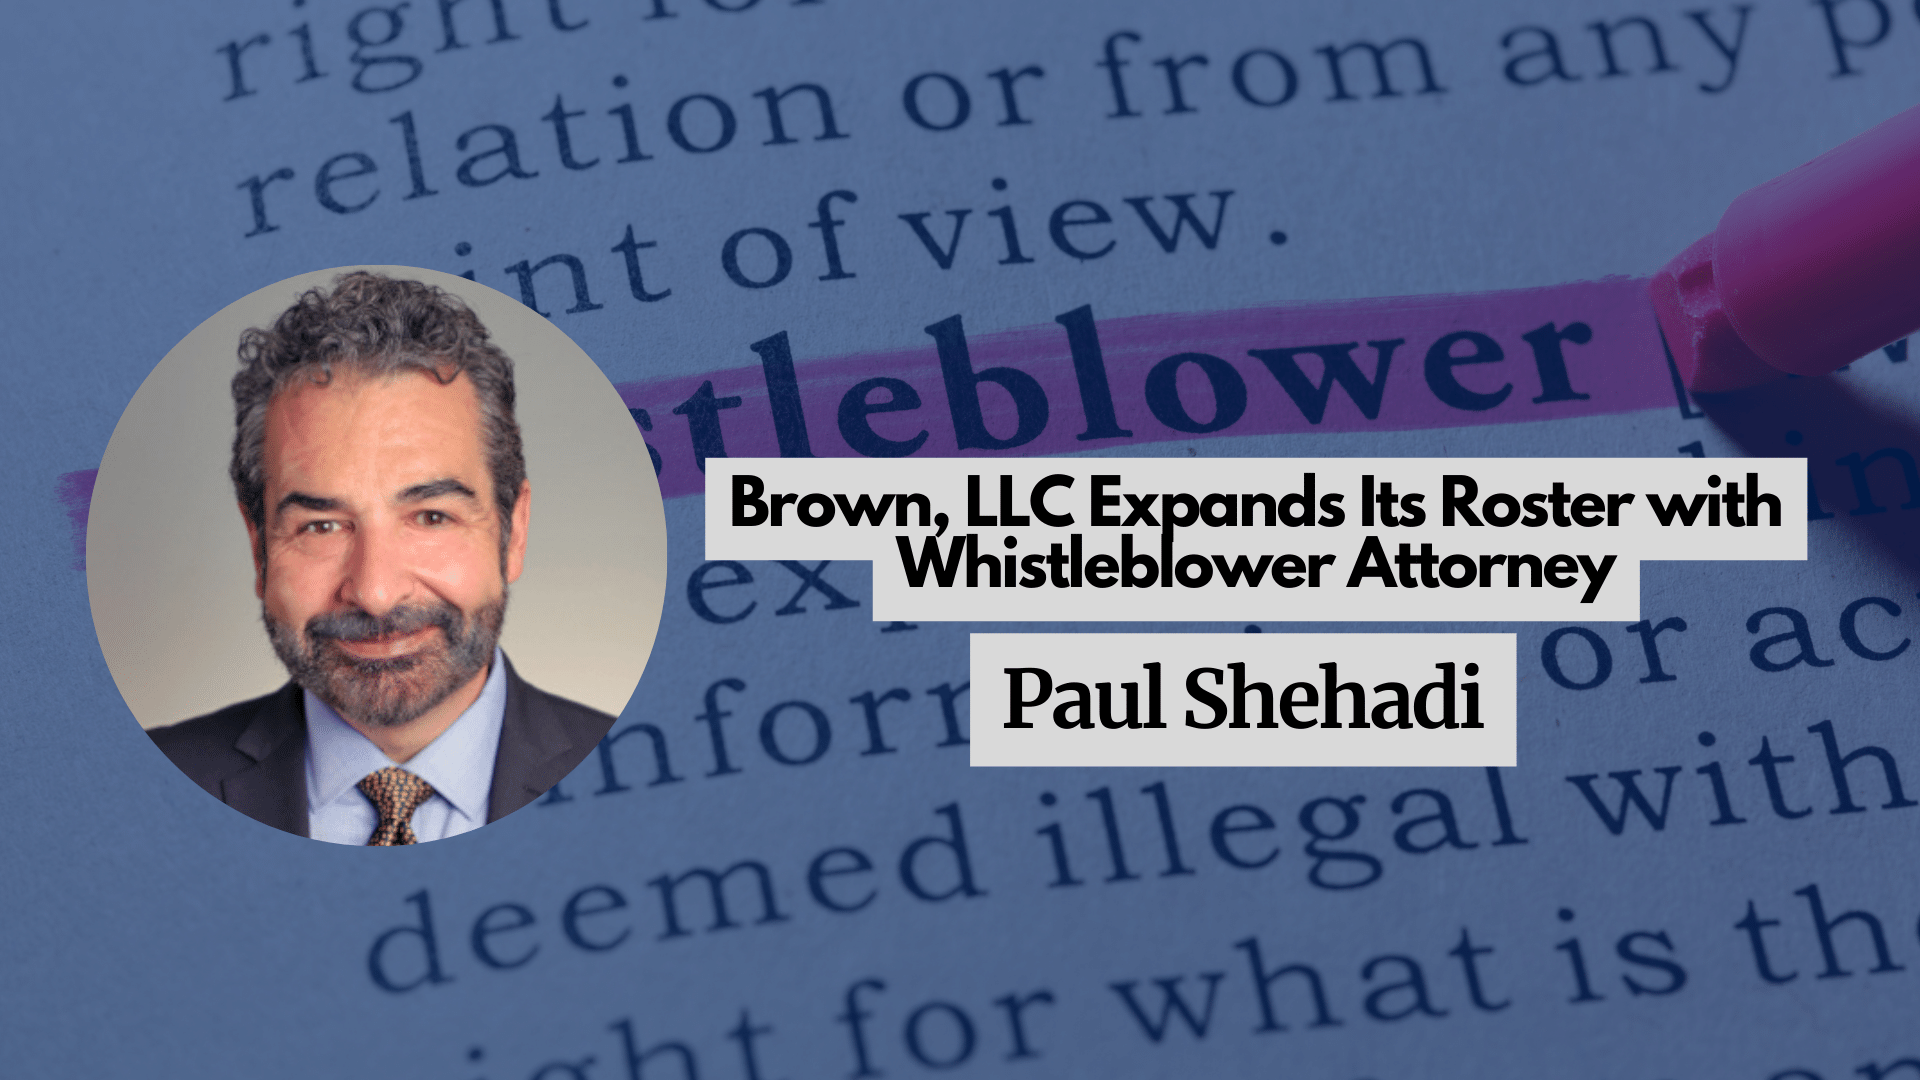 Brown, LLC Expands Its Roster with Whistleblower Attorney Paul Shehadi